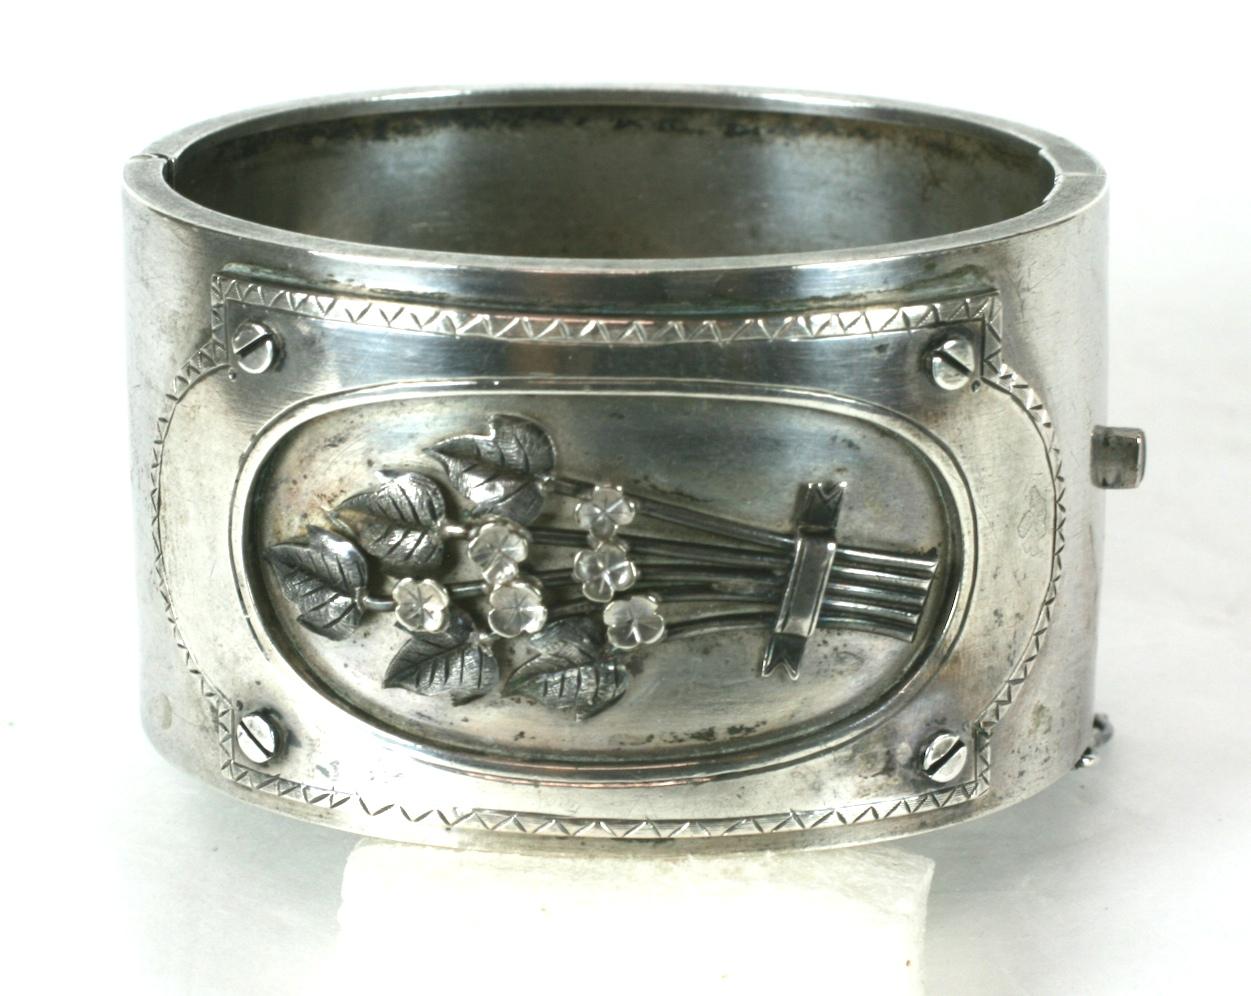 Charming Victorian Silver Cuff with central cartouche of flowers. Unusual design depicts a panel which is screwed onto the cuff like a picture frame with a bouquet of elaborately detailed flowers within. 
1880's USA. Silver, unmarked. Monogram 